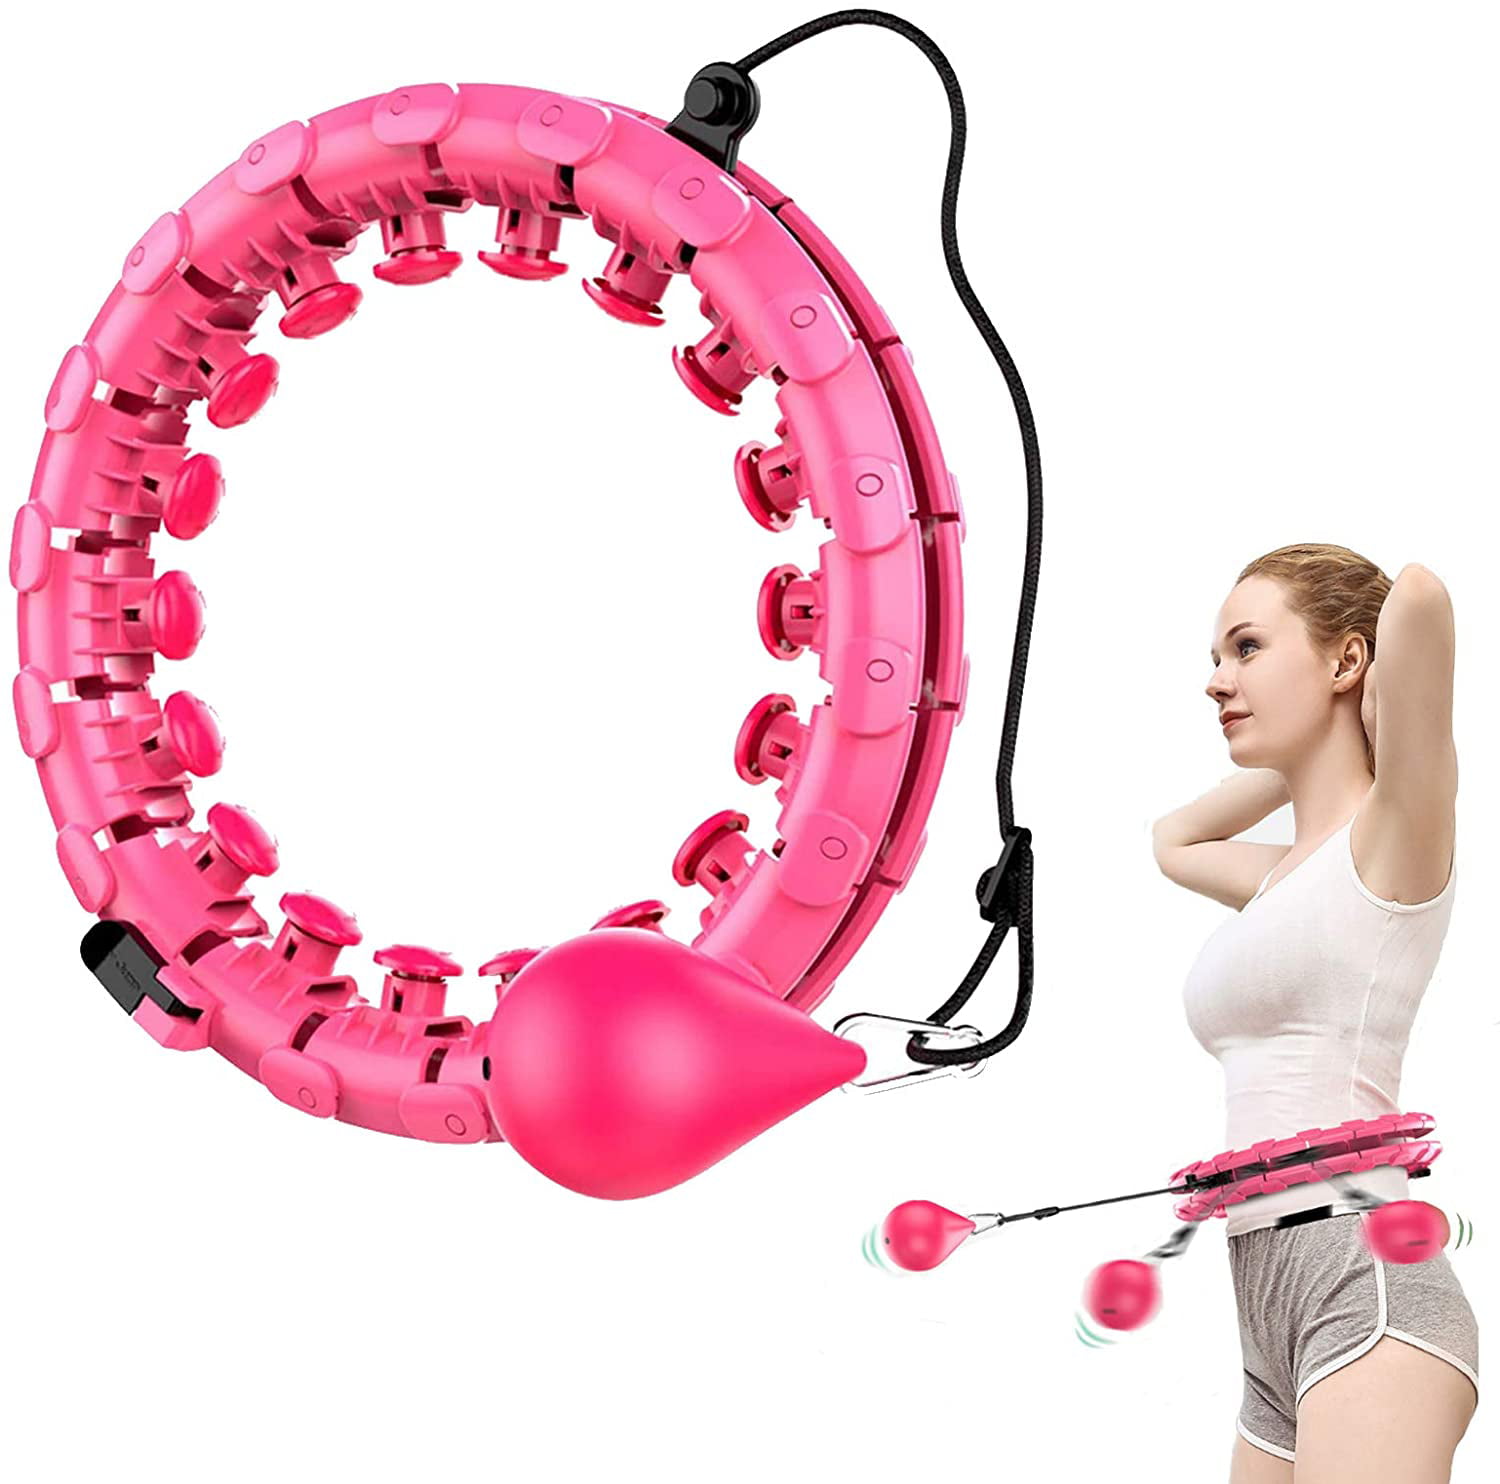 Weighted Smart Fitness Hoop for Adults & Kids Beginners Exercising 2 in 1 Abdomen Fitness Weight Loss Massage Non-Fall 360° Auto-Spinning 24 Detachable Knots Adjustable Size 